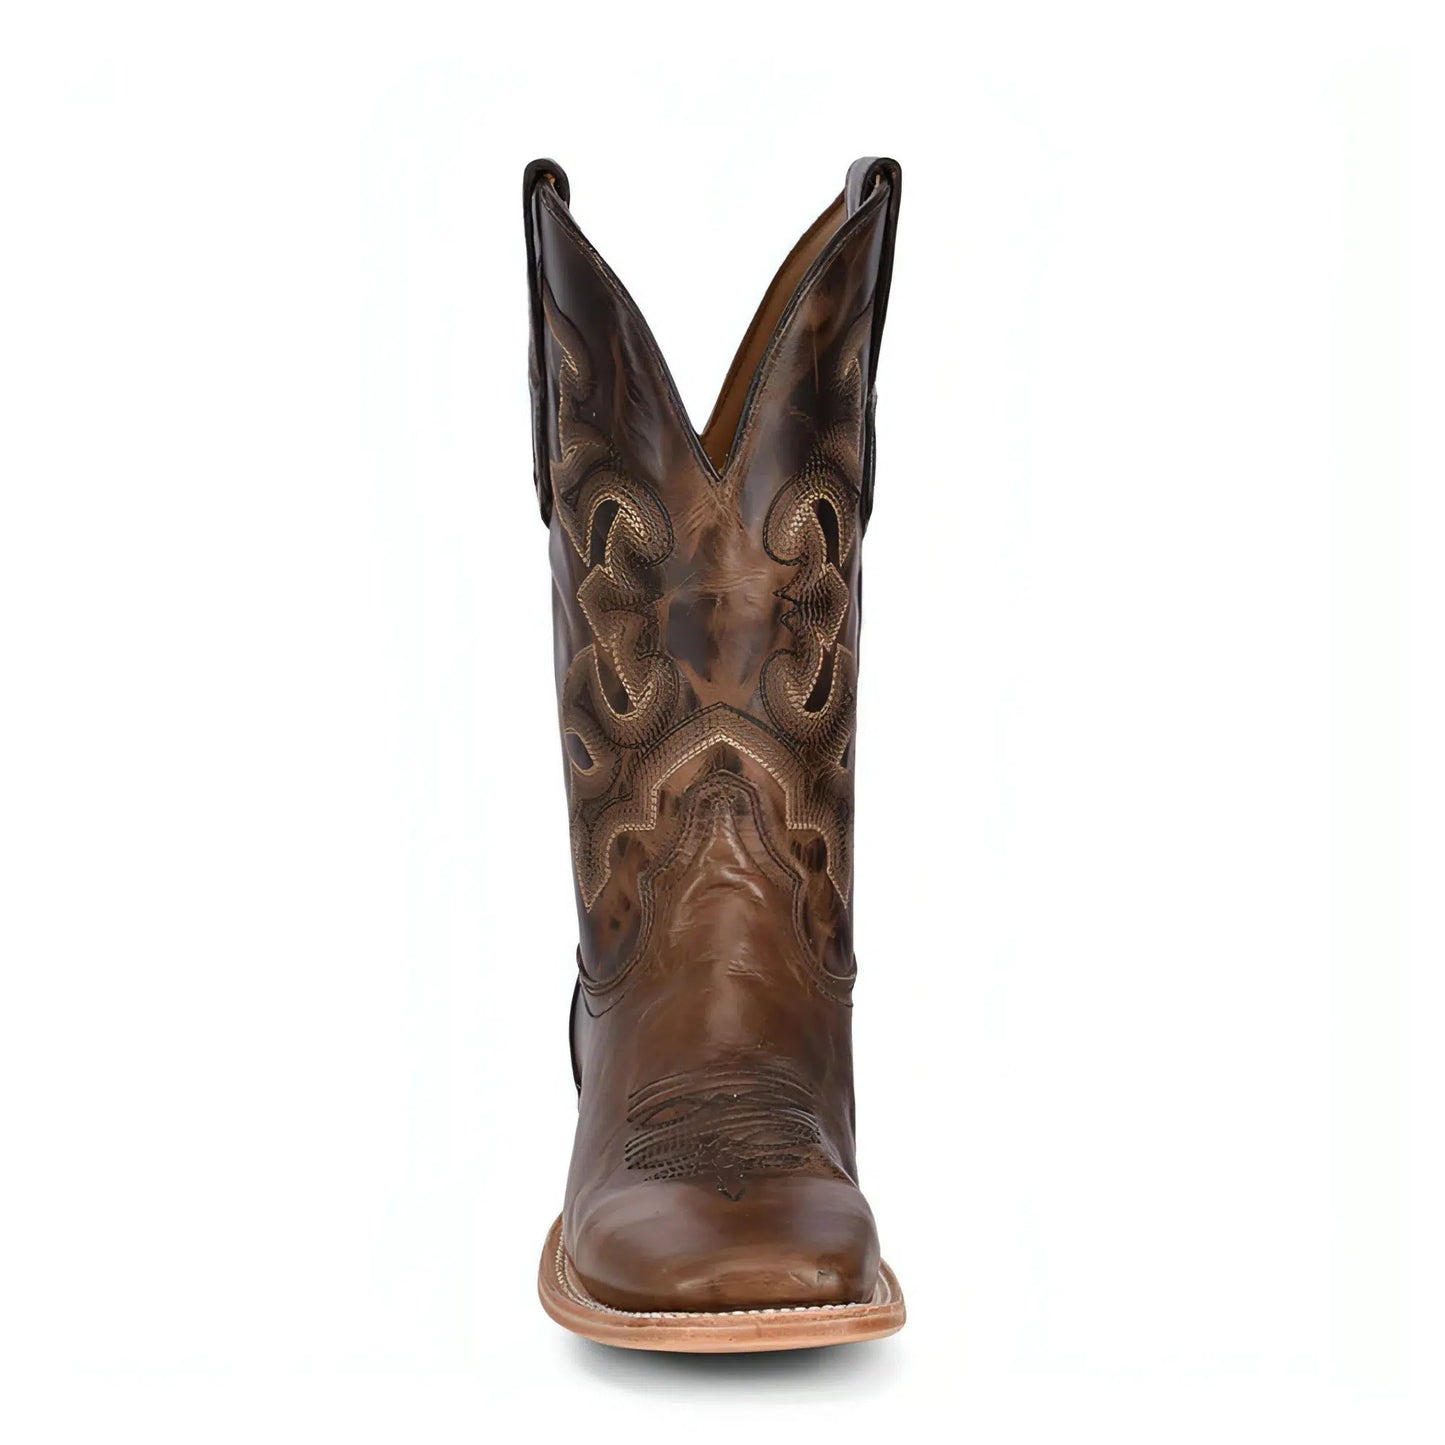 A4264-D - Corral brown western cowboy cowhide leather boots for men